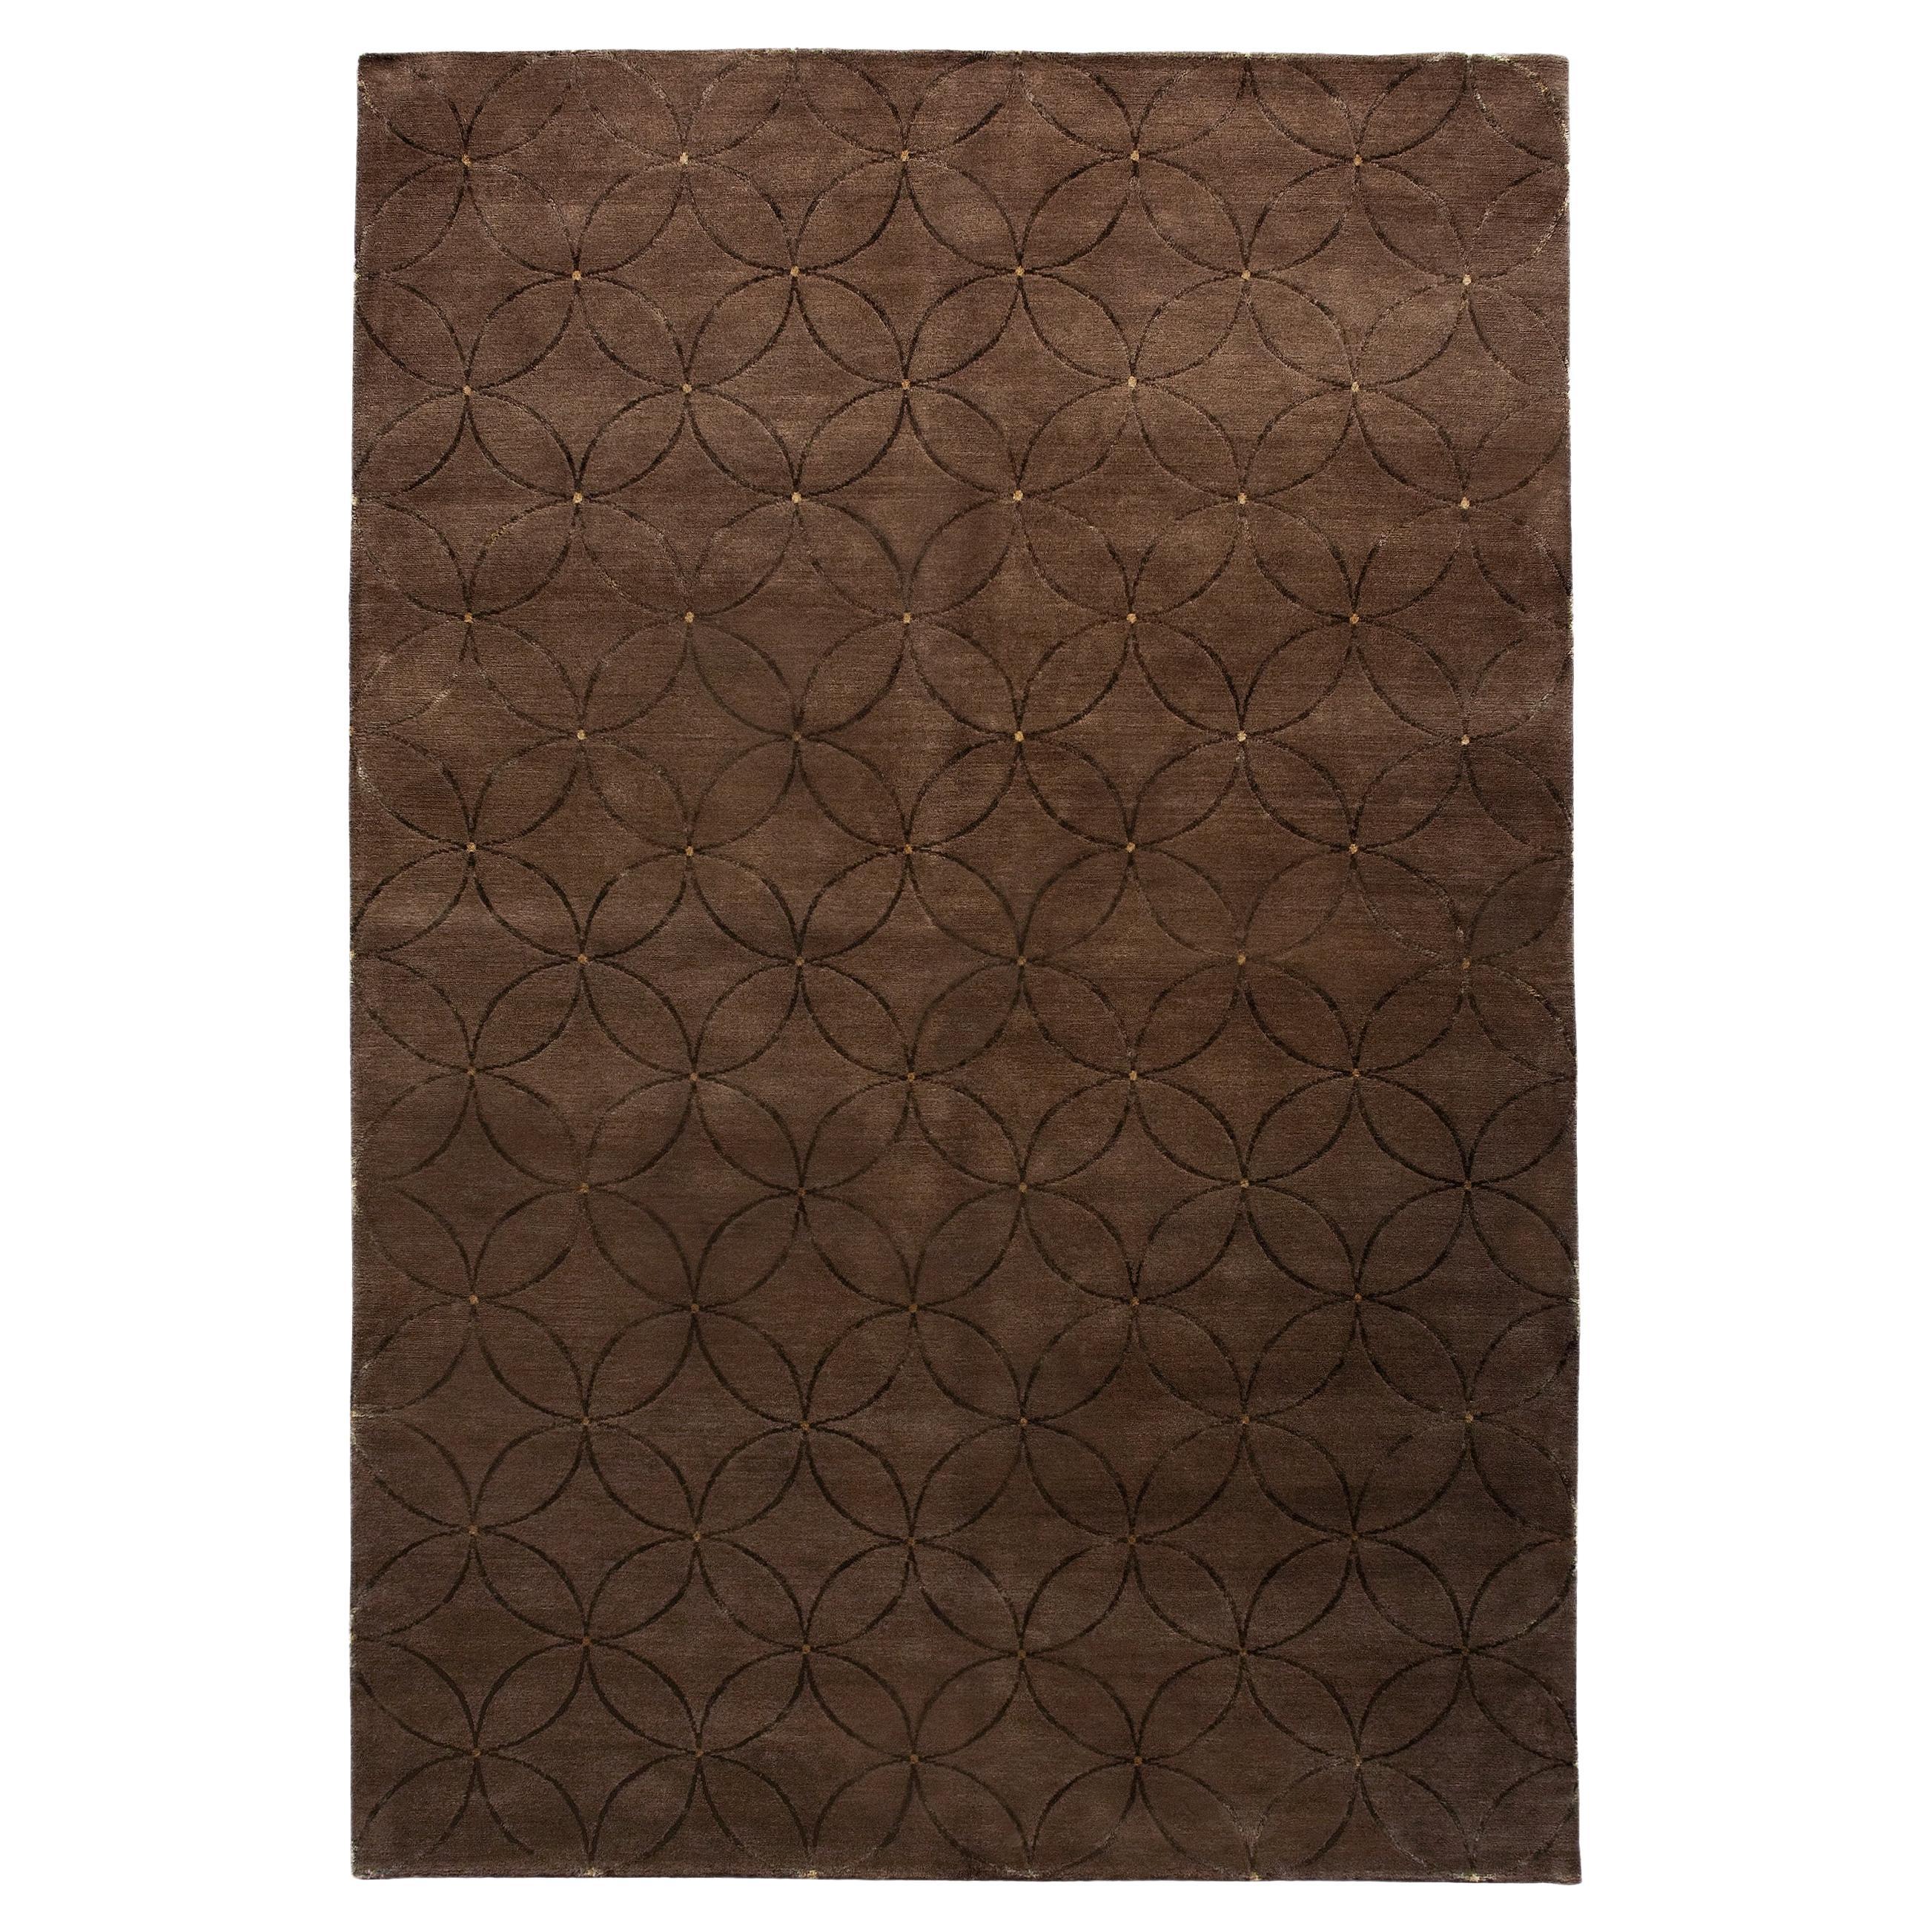 Luxury Modern Hand-Knotted Adaptations Circle Lattice Brown 12x16 Rug